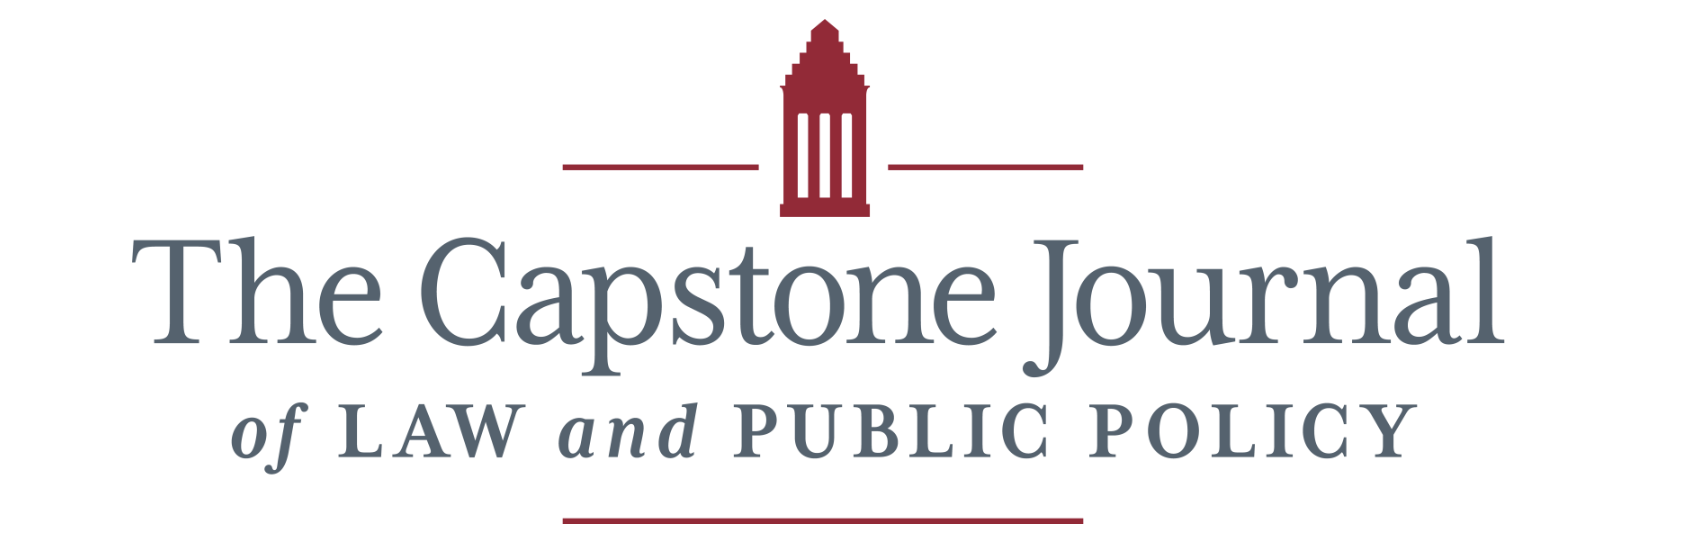 A red and grey logo that says "The Capstone Journal of Law and Public Policy"